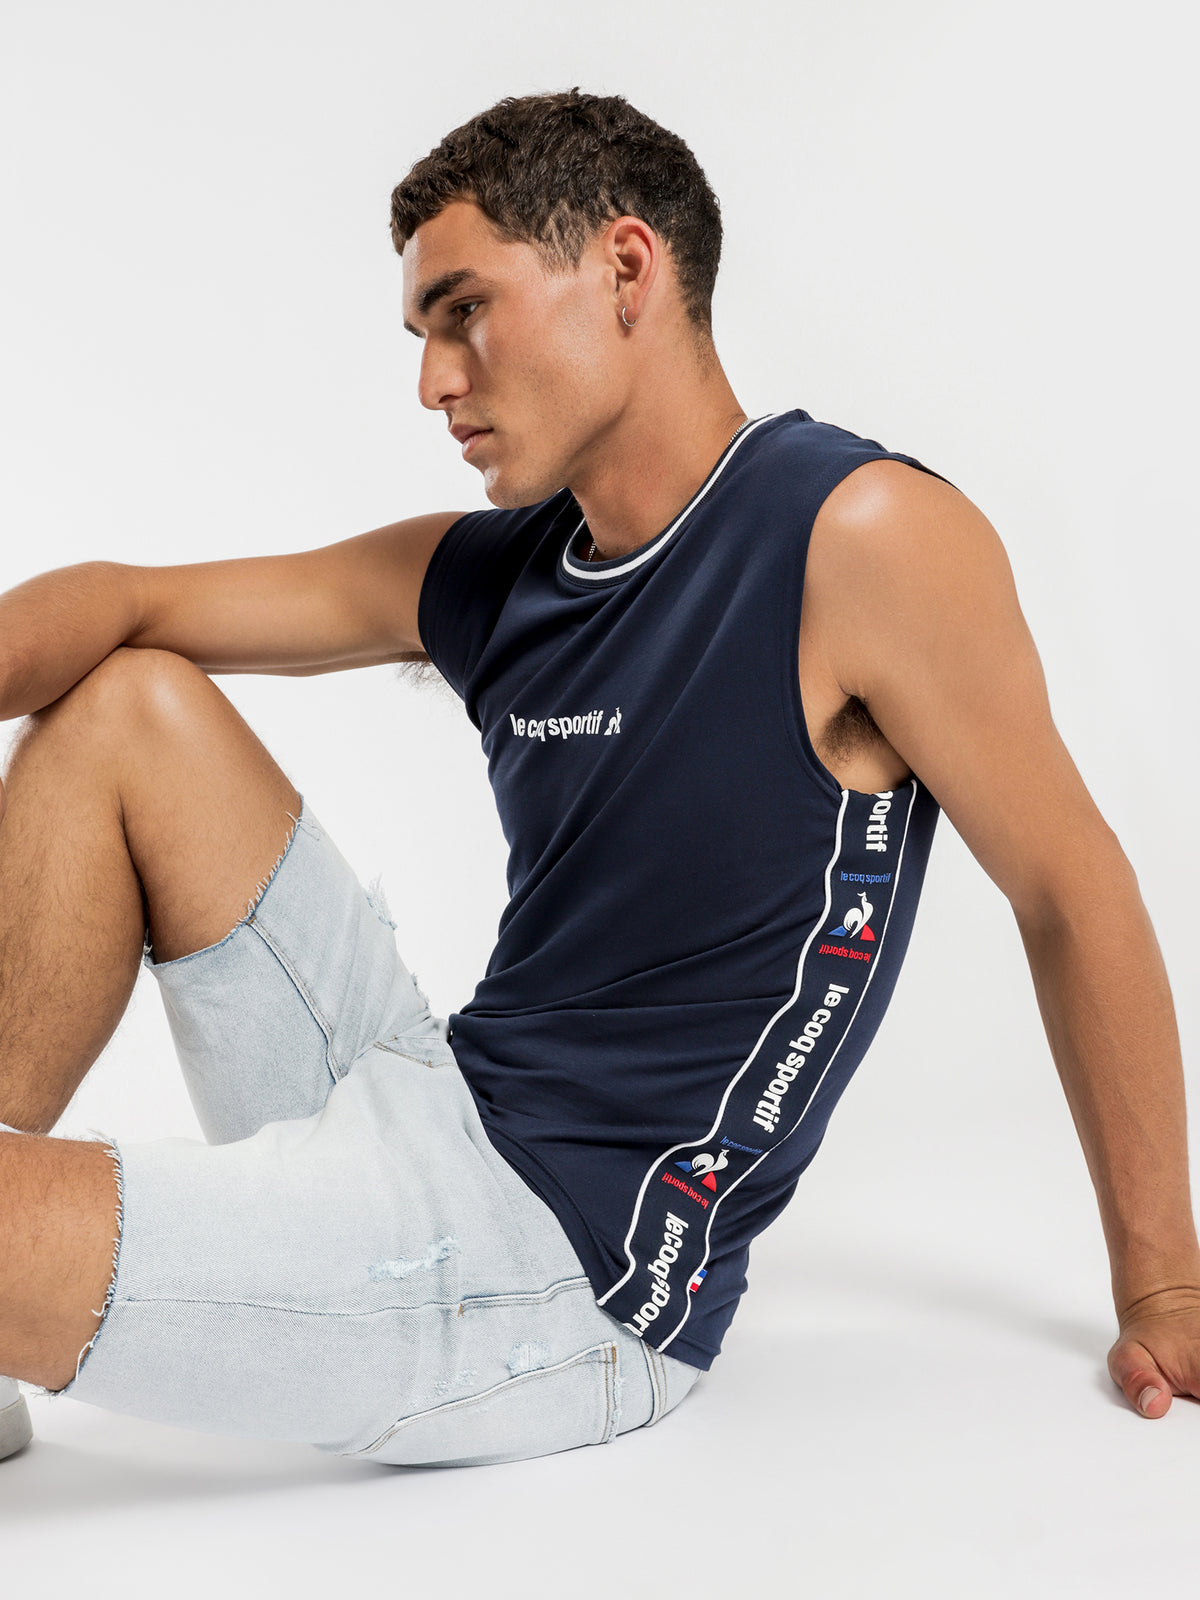 Xavier Muscle T-Shirt in Navy